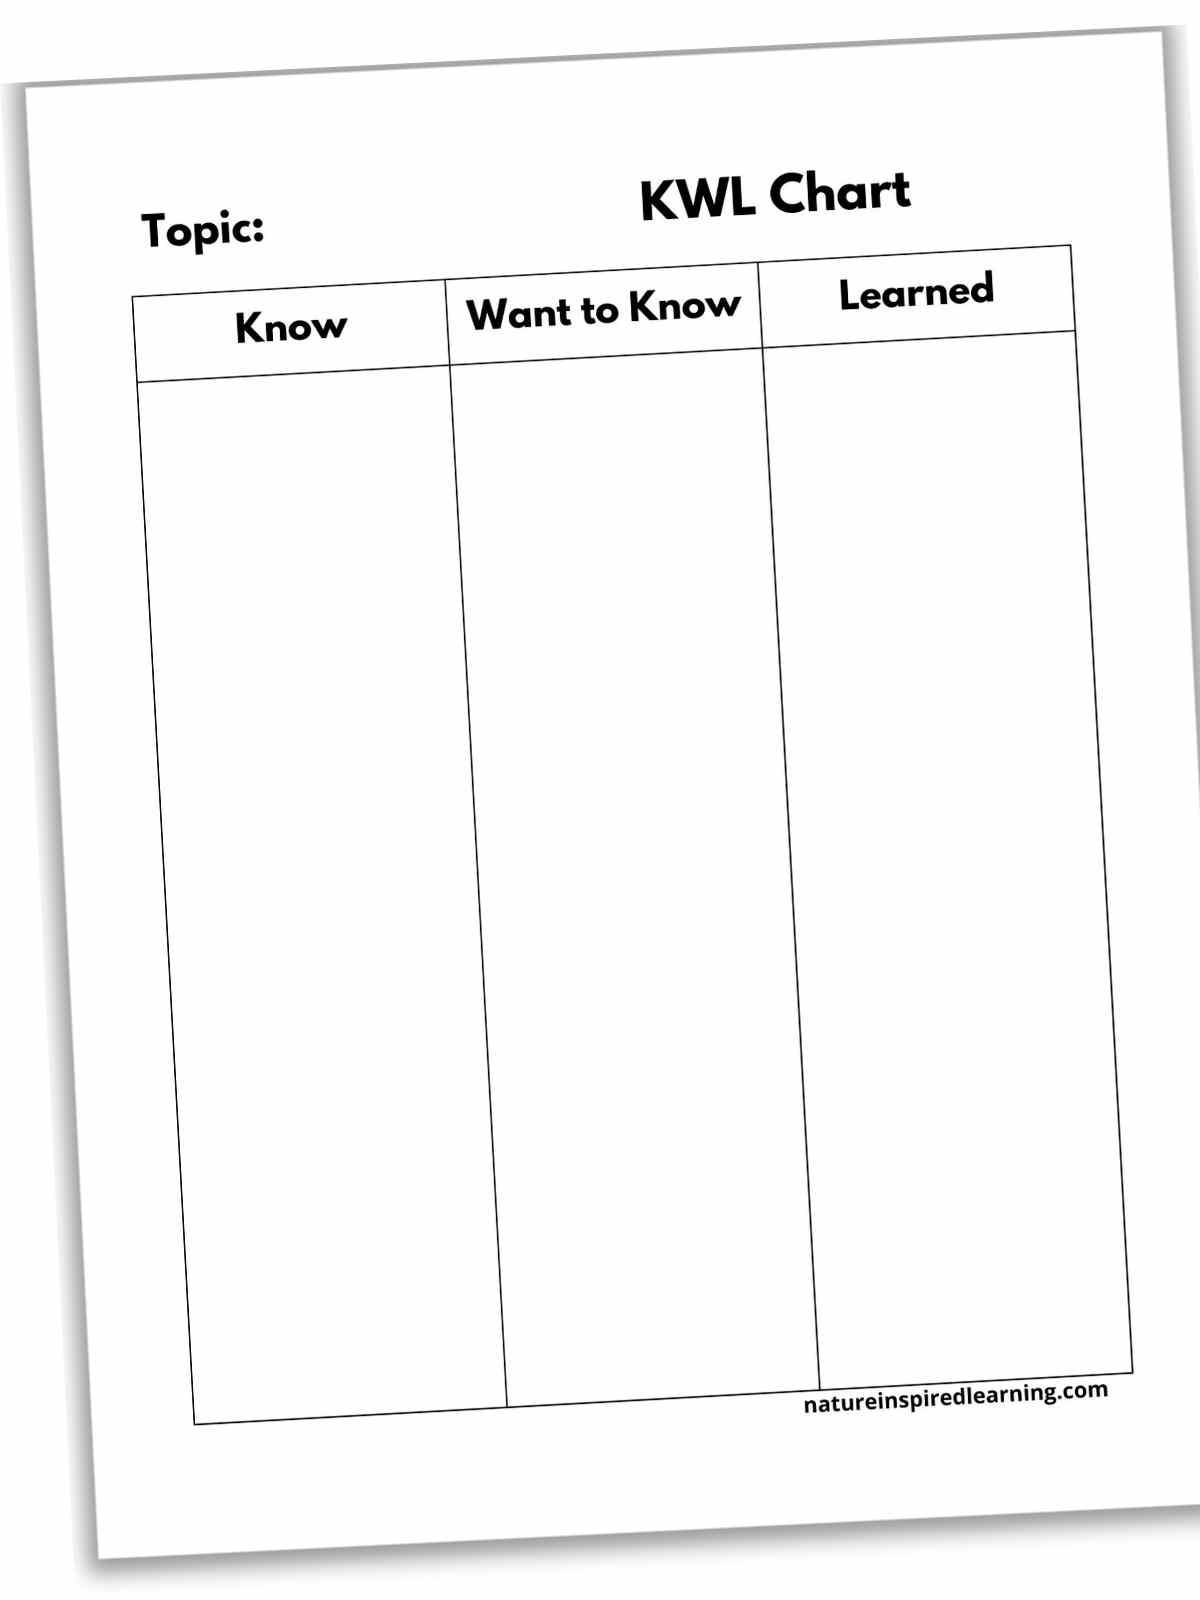 vertical chart with topic, a title, and headings for the three columns.